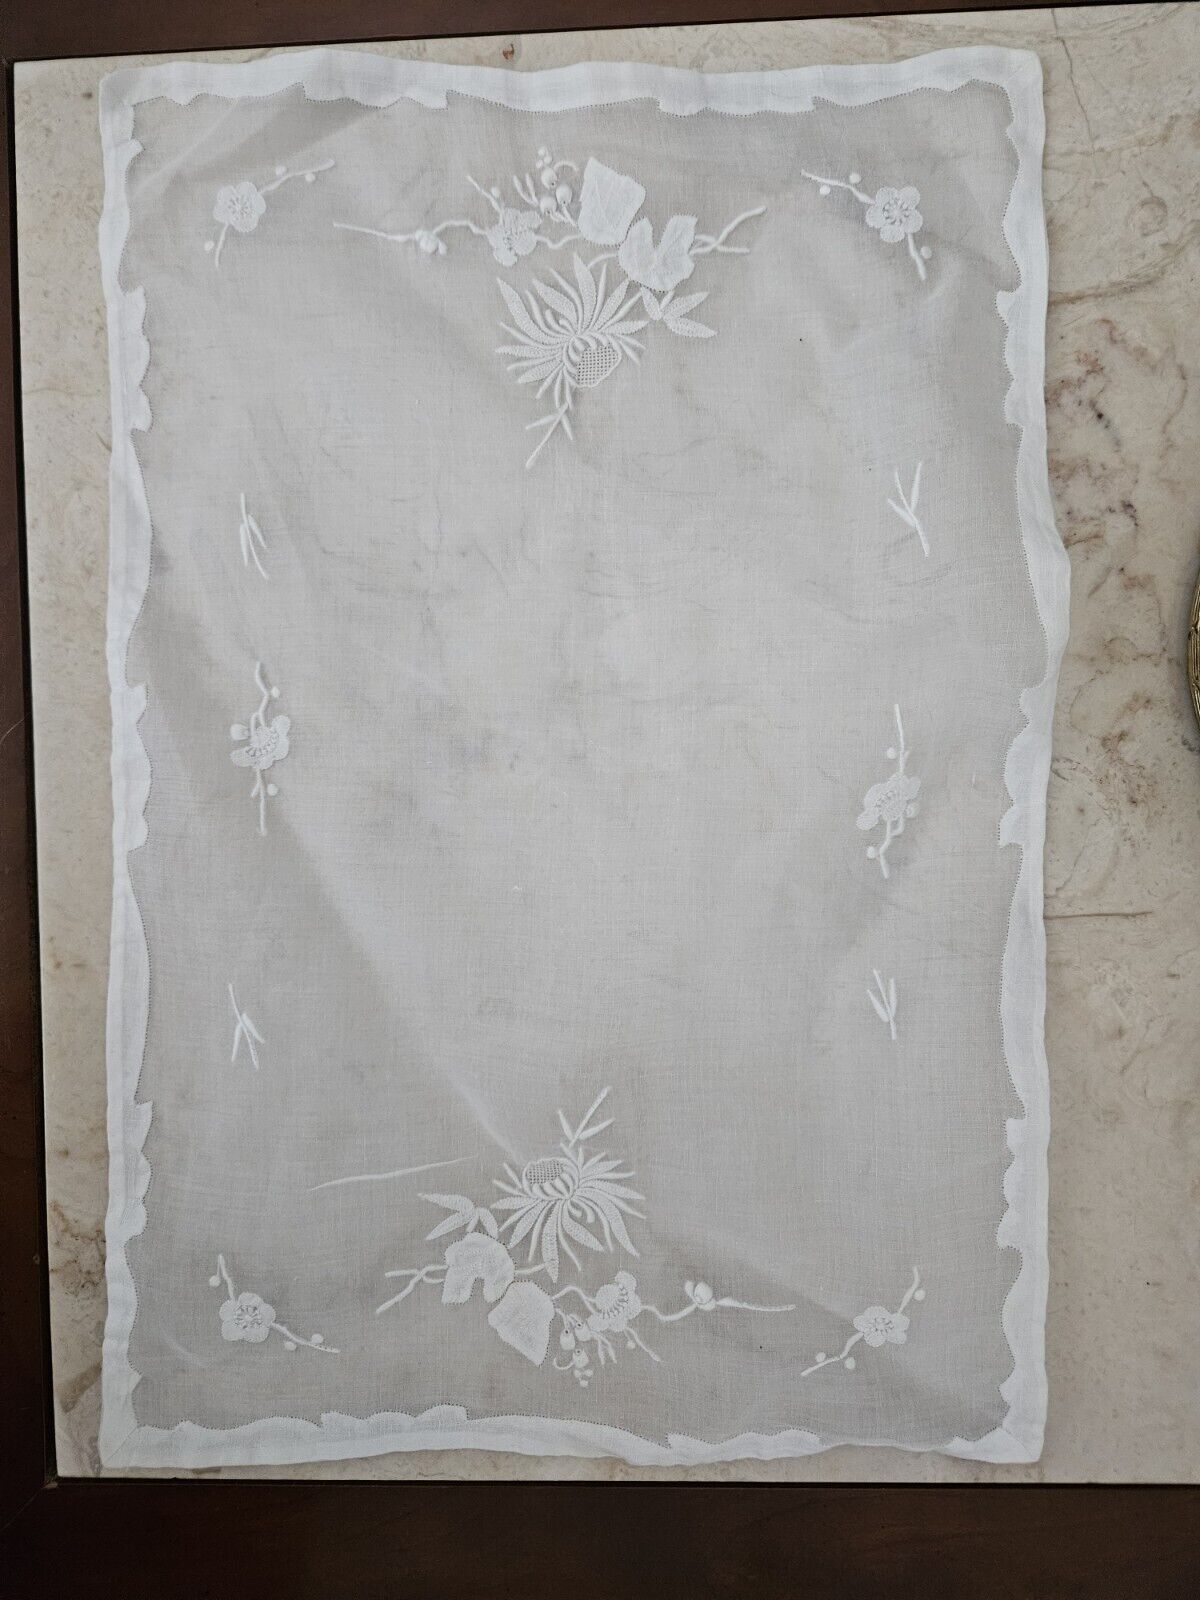 Gorgeous Vintage Organza Chiffon Placemats Set Of 7 Victorian Embroidered